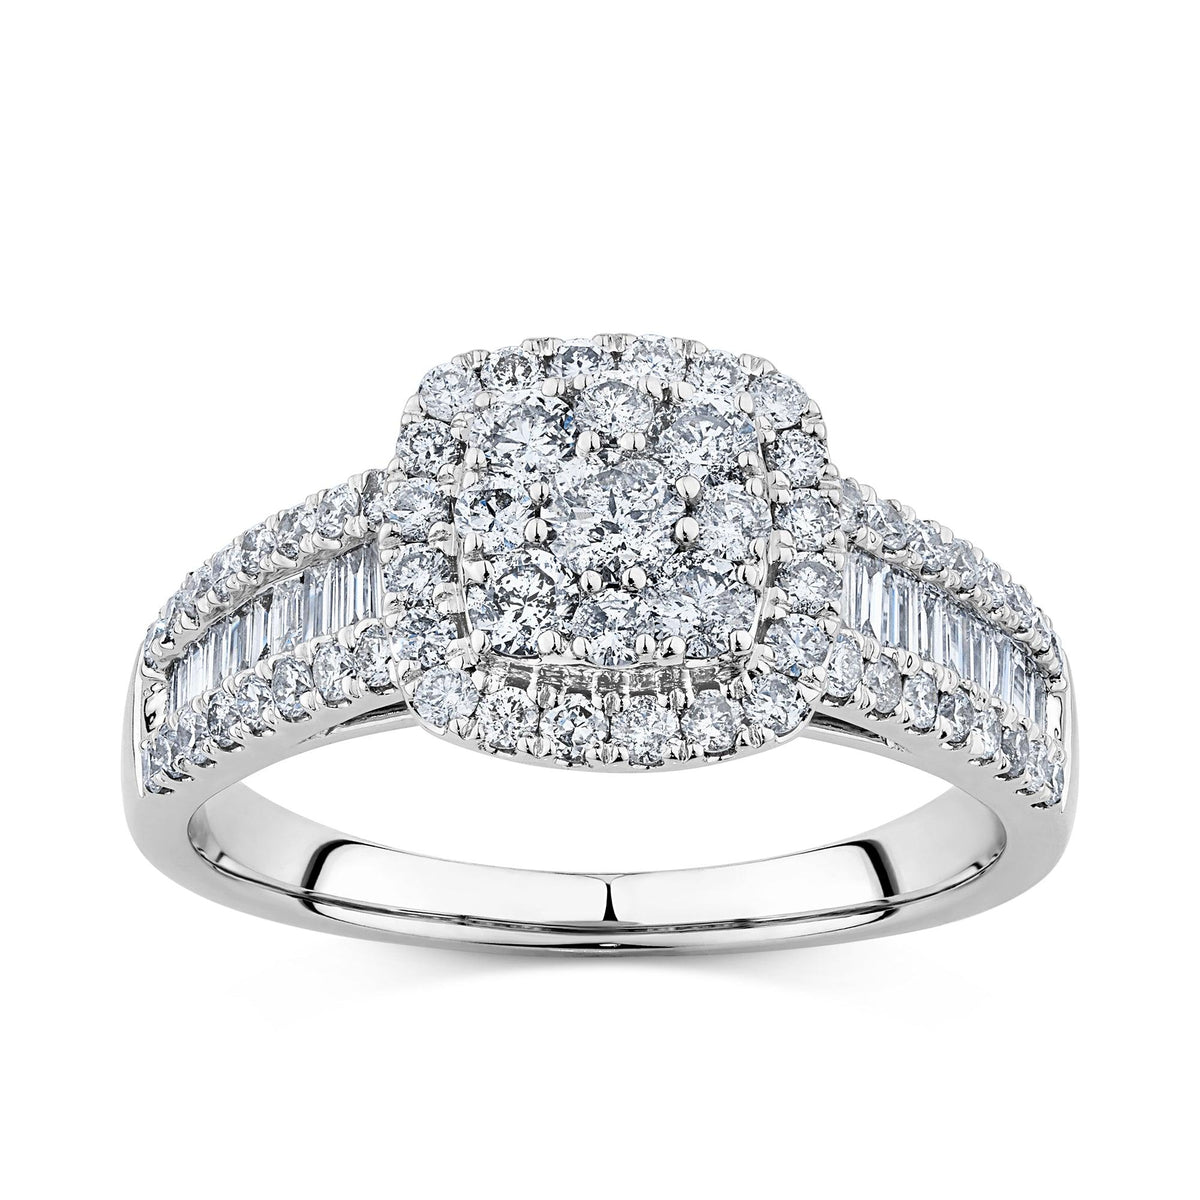 1ct TW Diamond Square Halo Engagement Ring in 9ct White Gold - Wallace Bishop